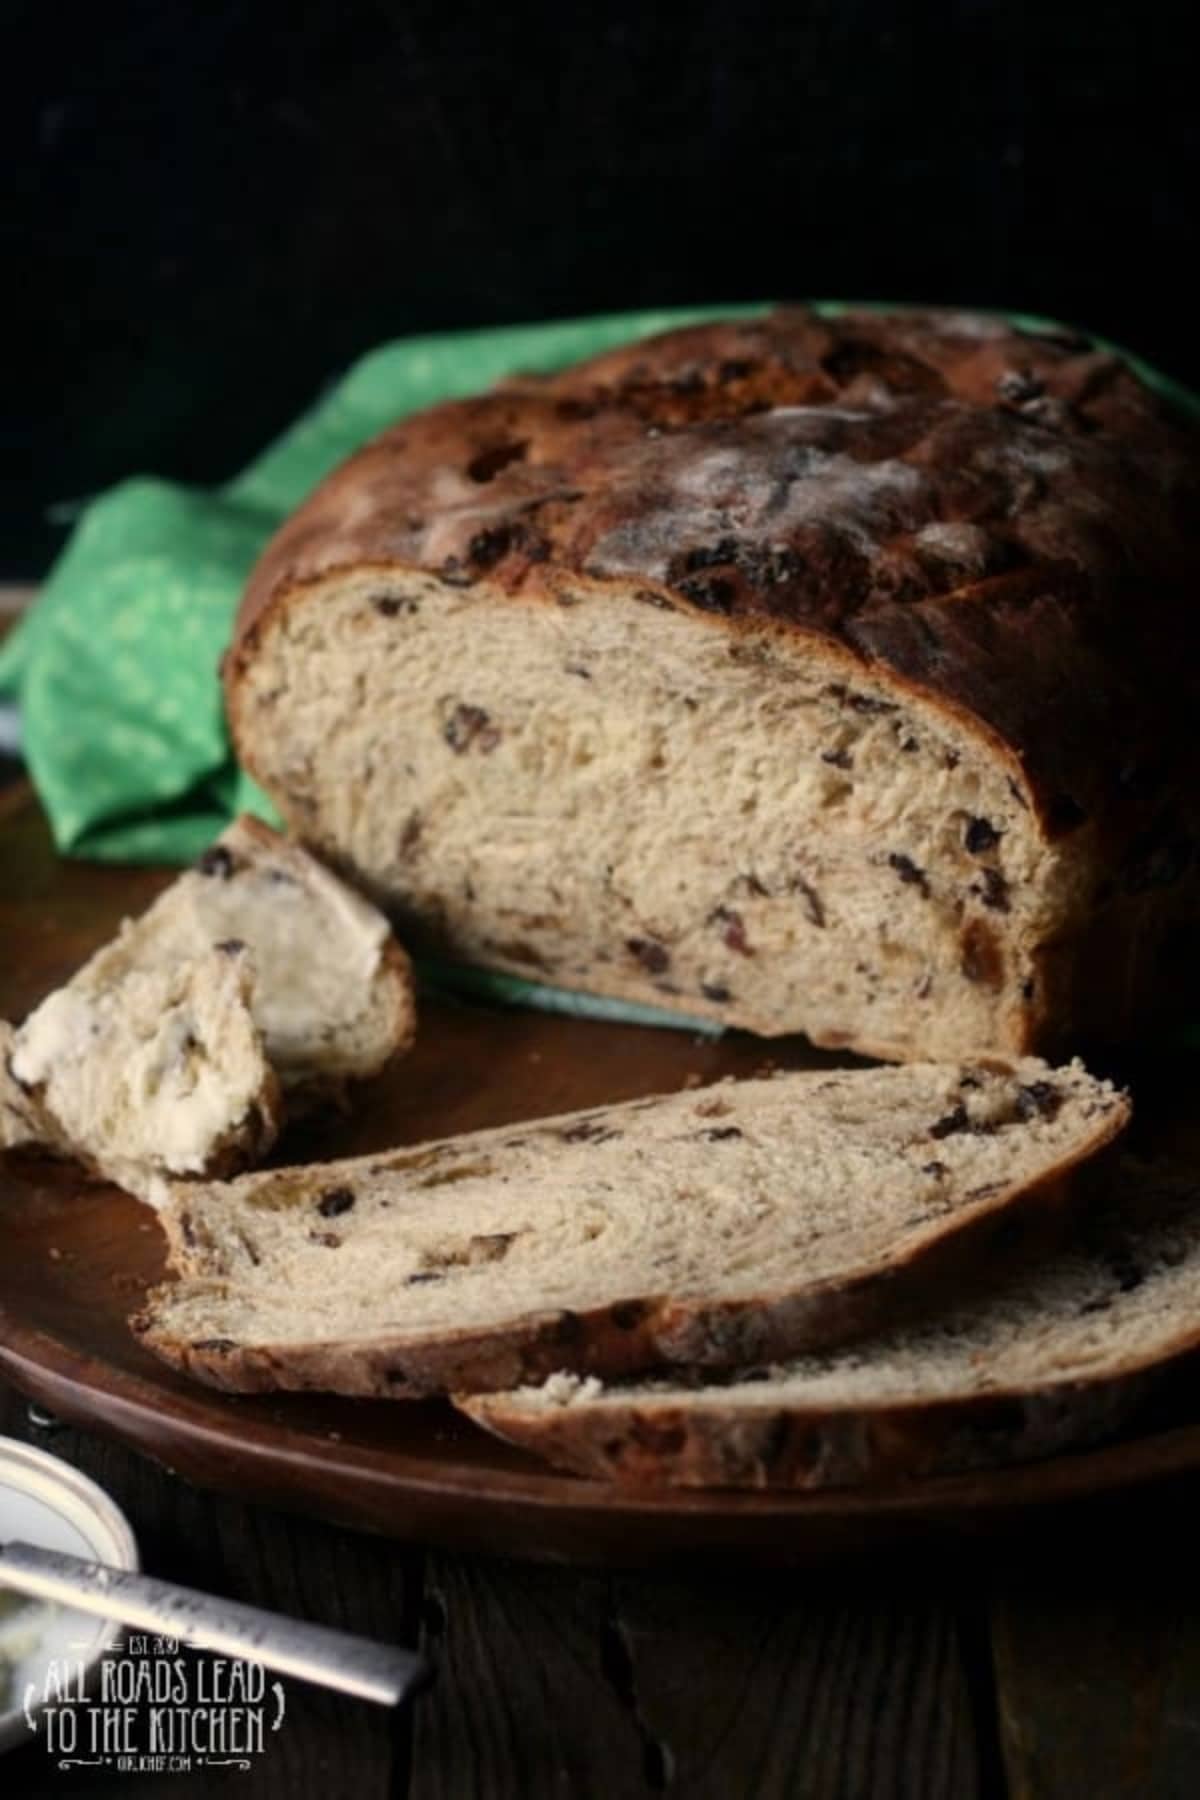 Irish Barmbrack bread sliced and photographed from the side.